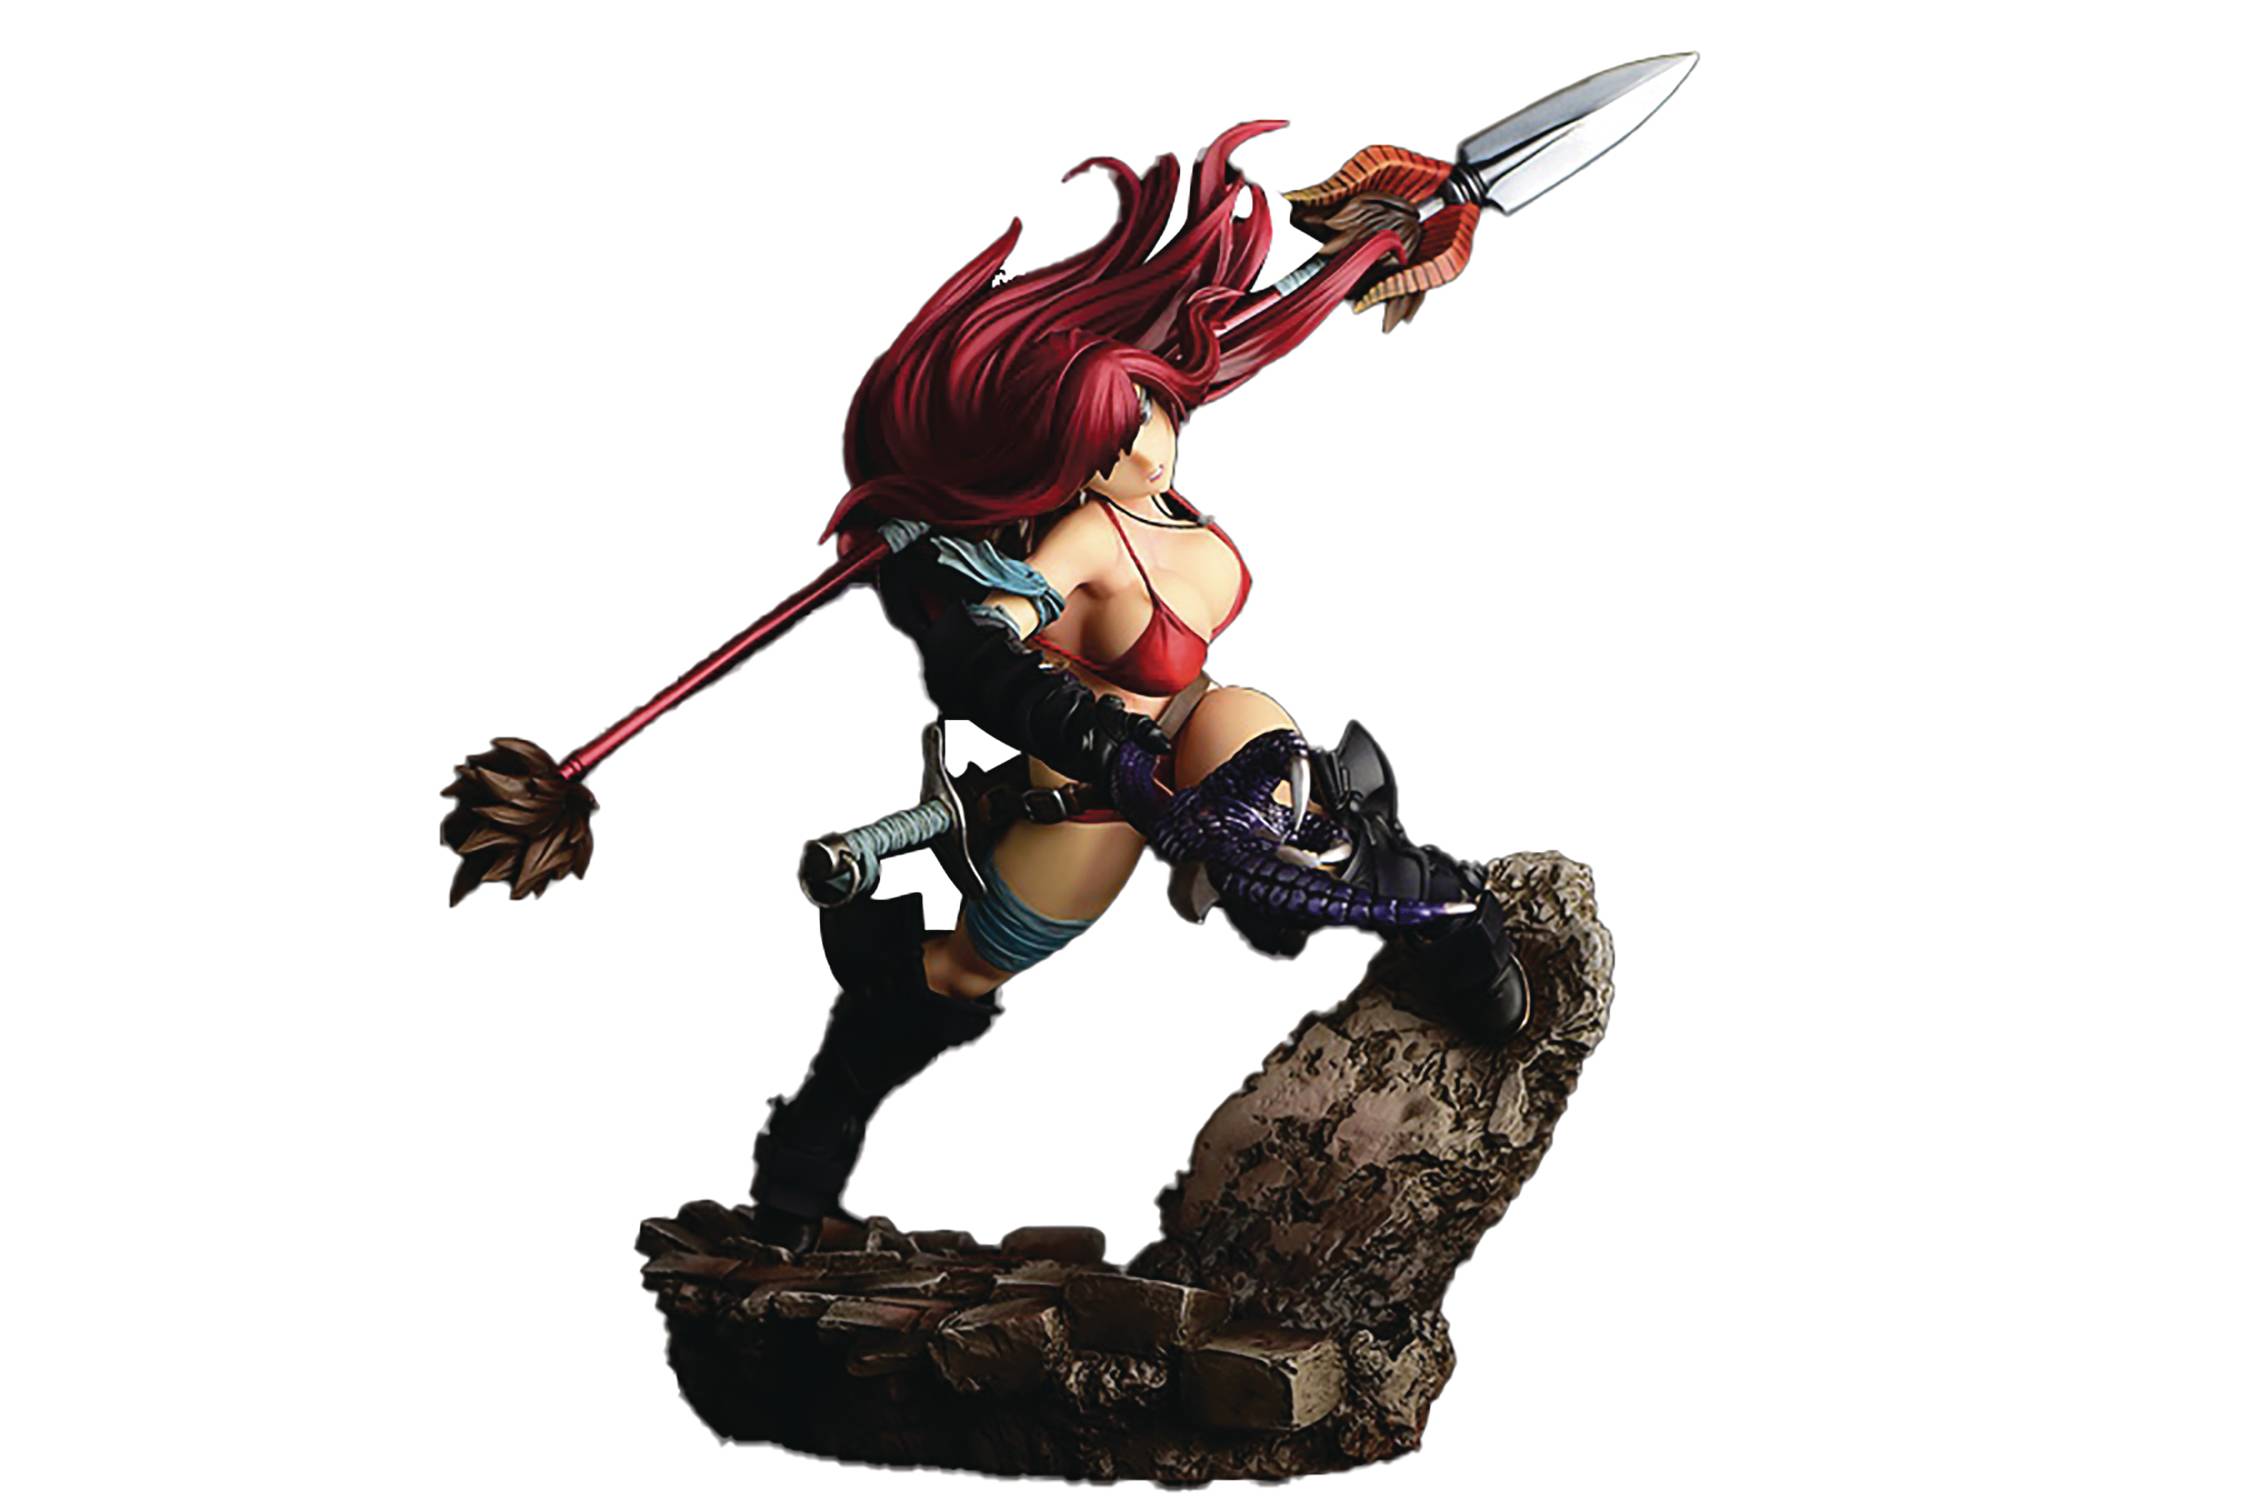 FAIRY TAIL ERZA SCARLET THE KNIGHT BLK ARMOR 1/6 PVC FIG